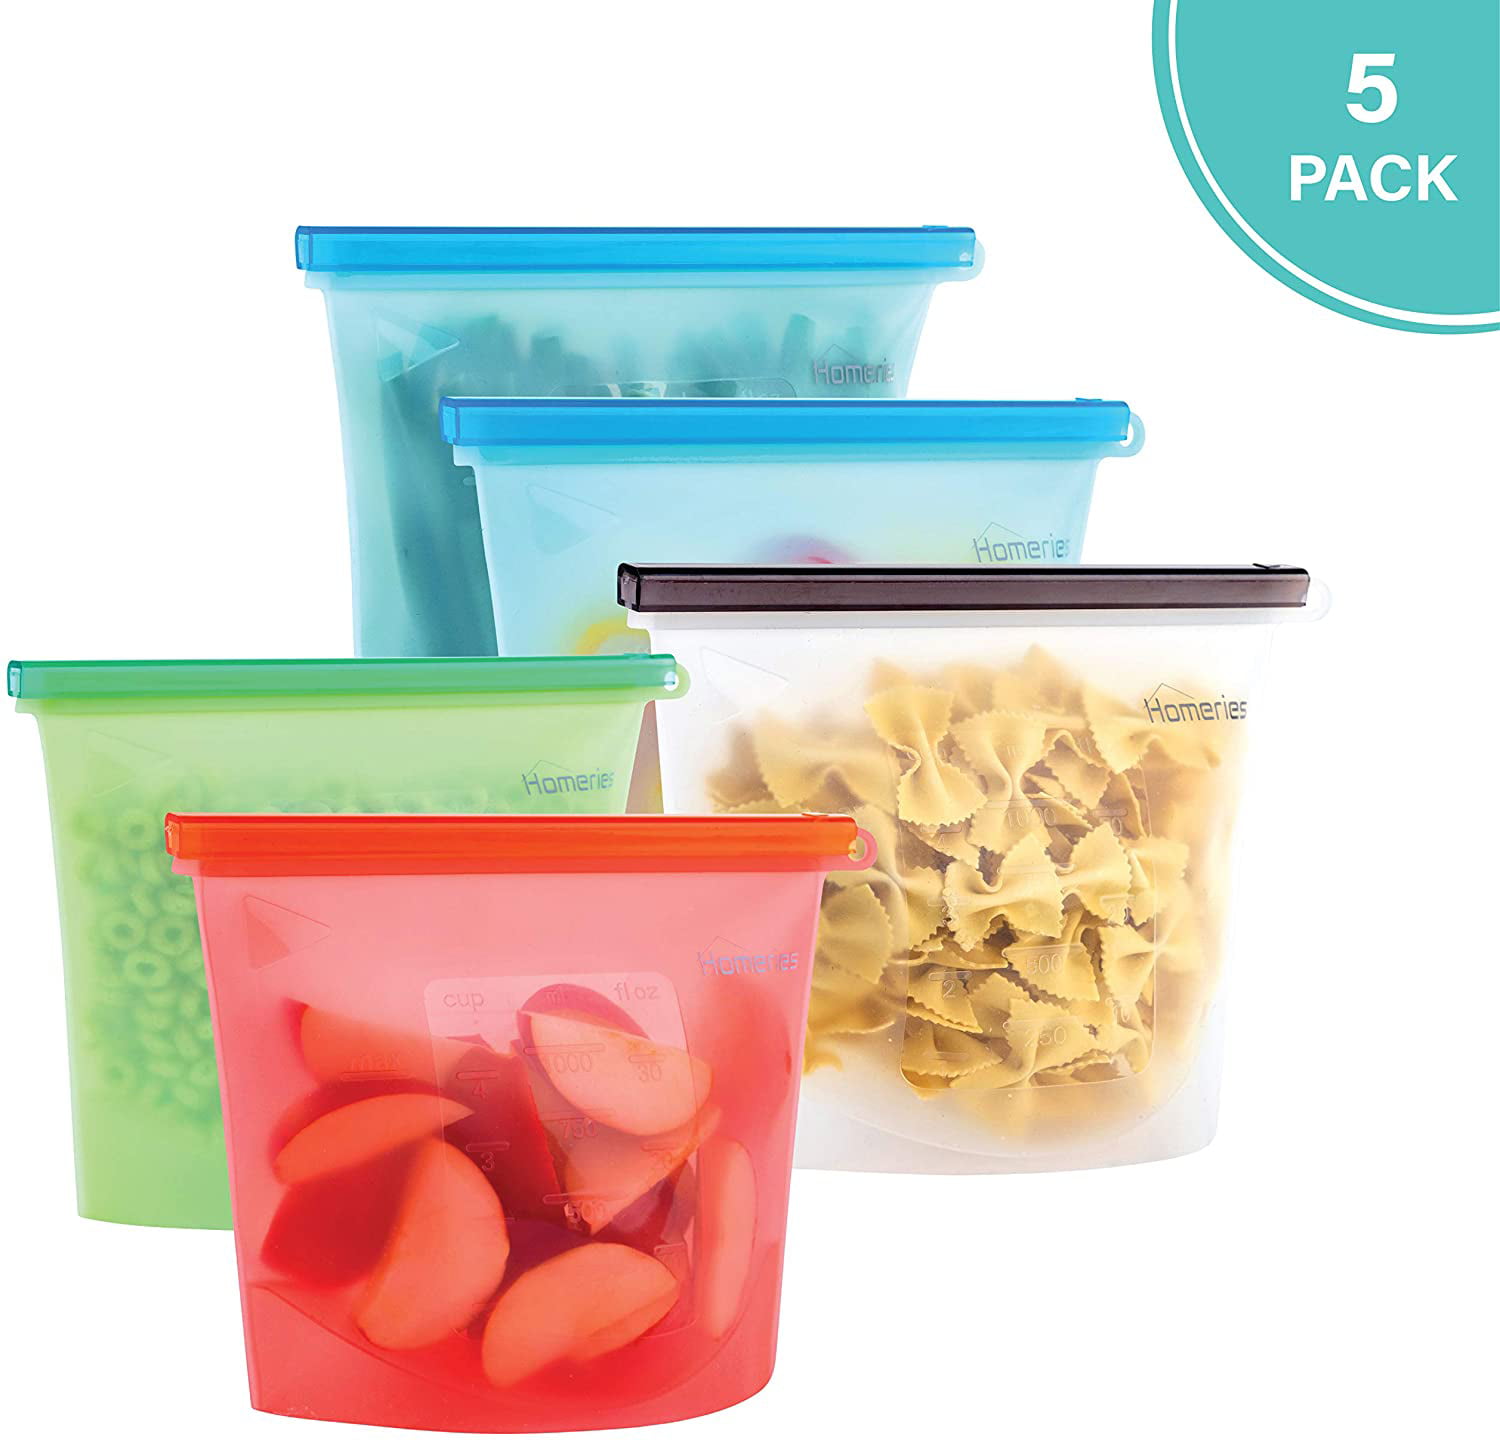 Reusable Silicone Food Storage Bags 5 Pack Eco Friendly BPA Free Sandwich Bags 